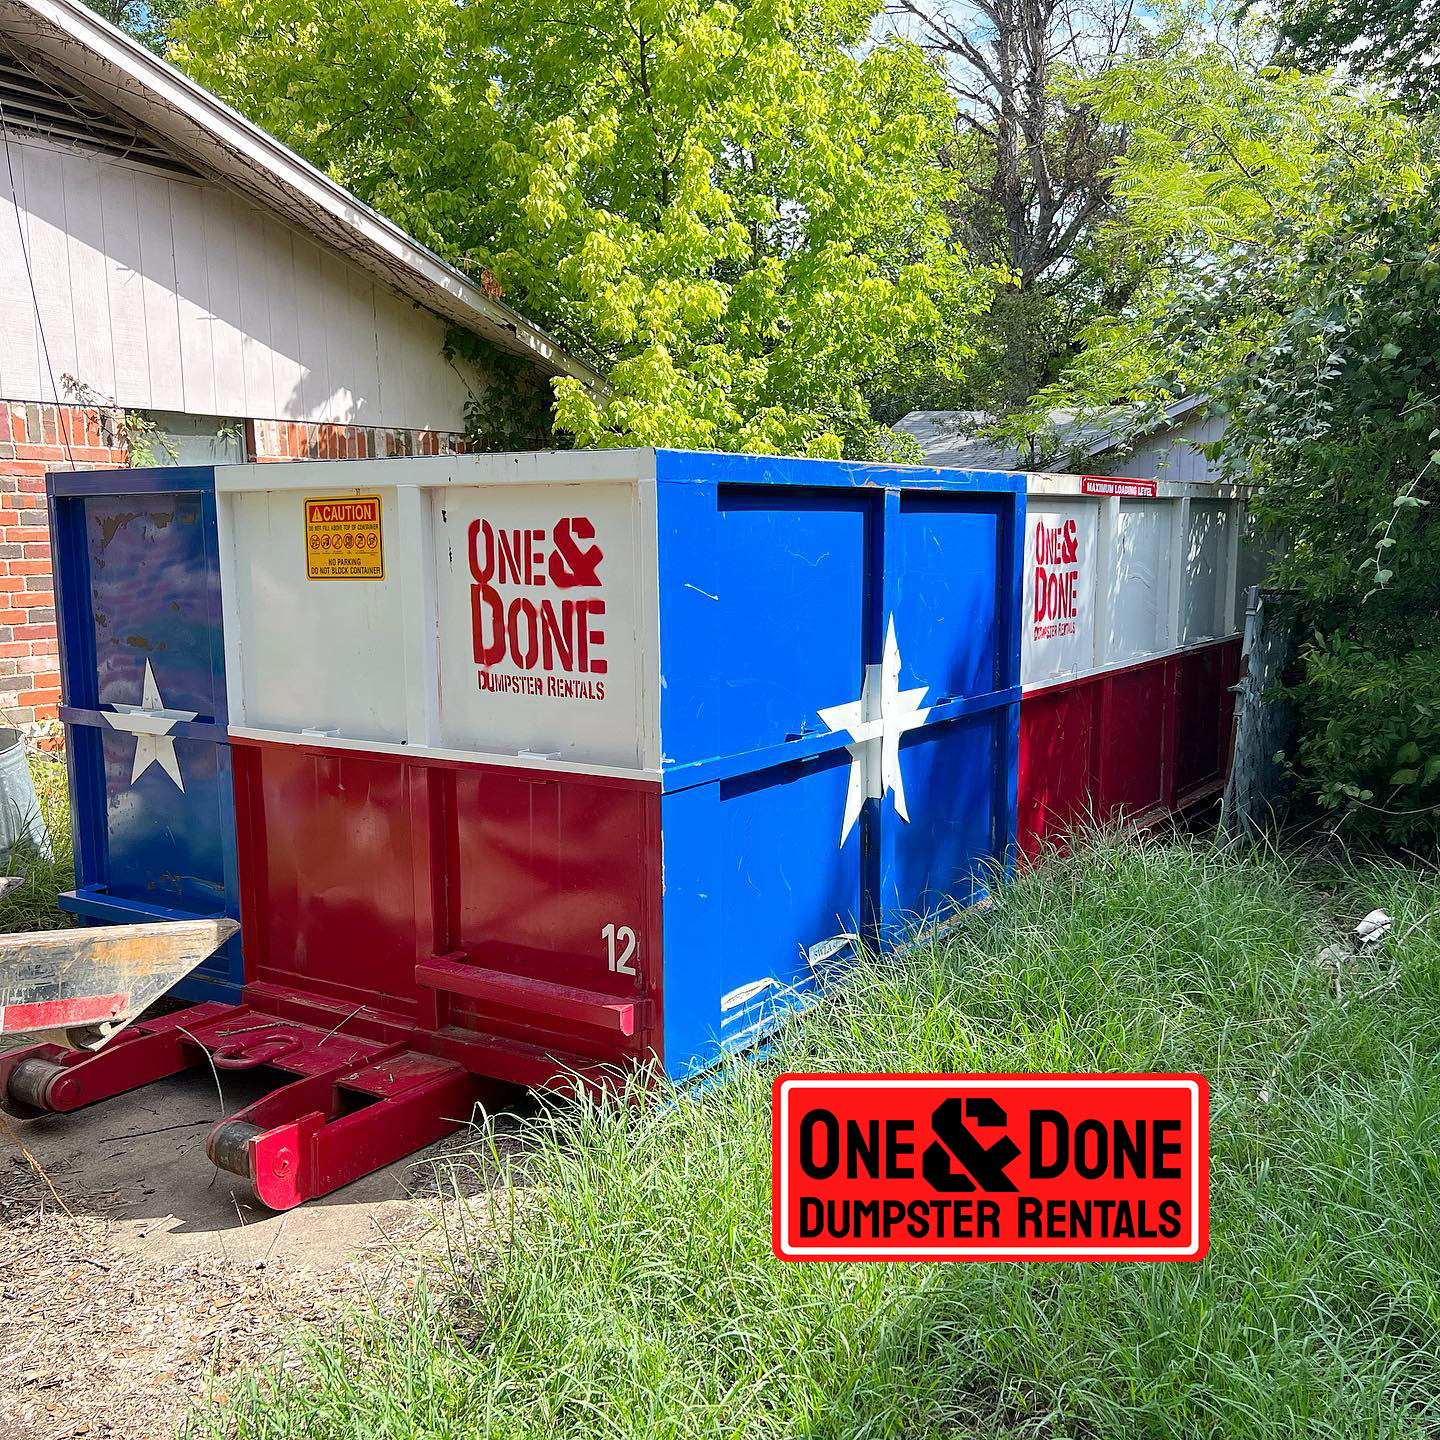 Small Dumpster Rental One and Done Dumpster Rentals Hewitt TX Homeowners Use for Yard Waste